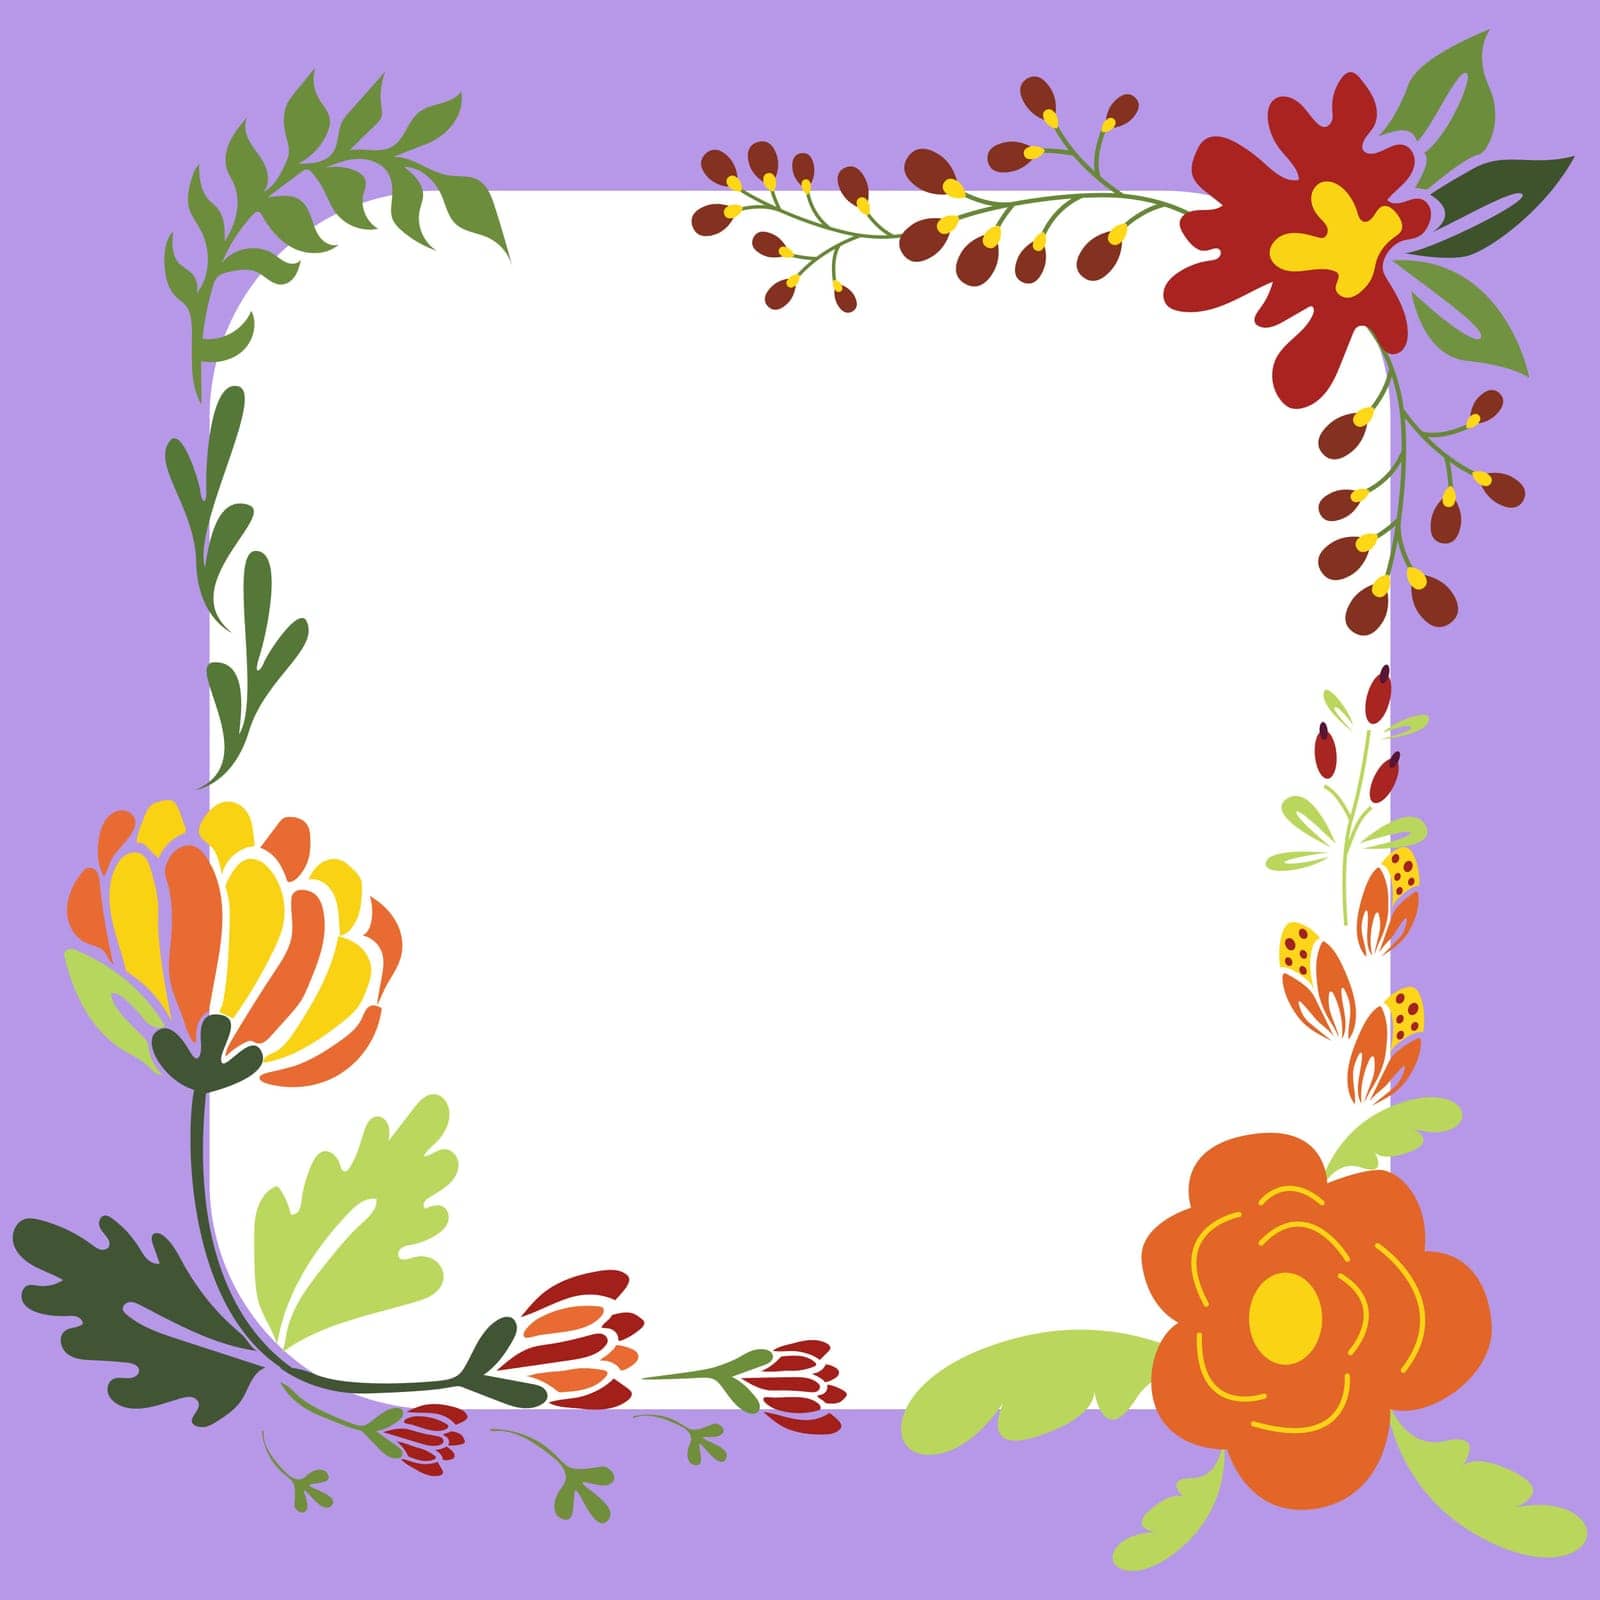 Blank purple Frame Decorated With Colorful Flowers And Foliage